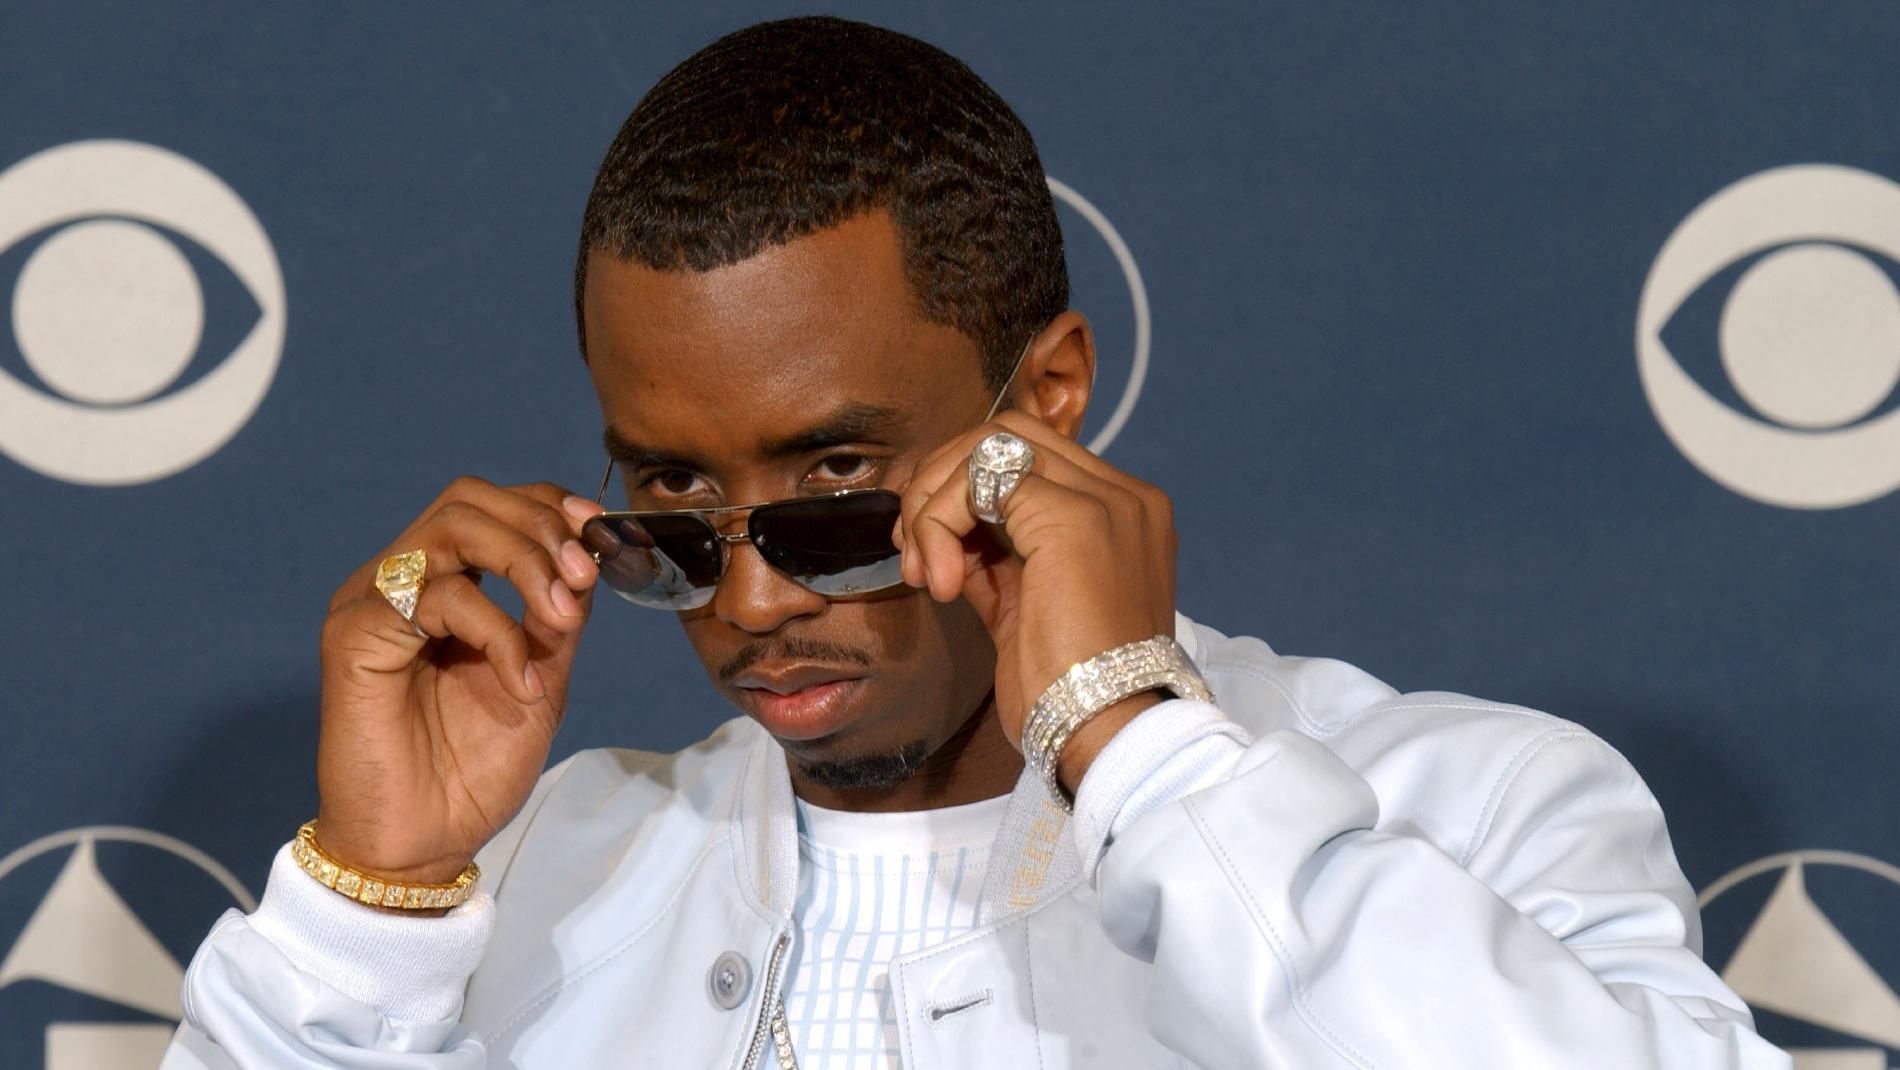 I NEED A GIRL PART 2 - Diddy (P. Diddy / Puff Daddy / Brother Love) 